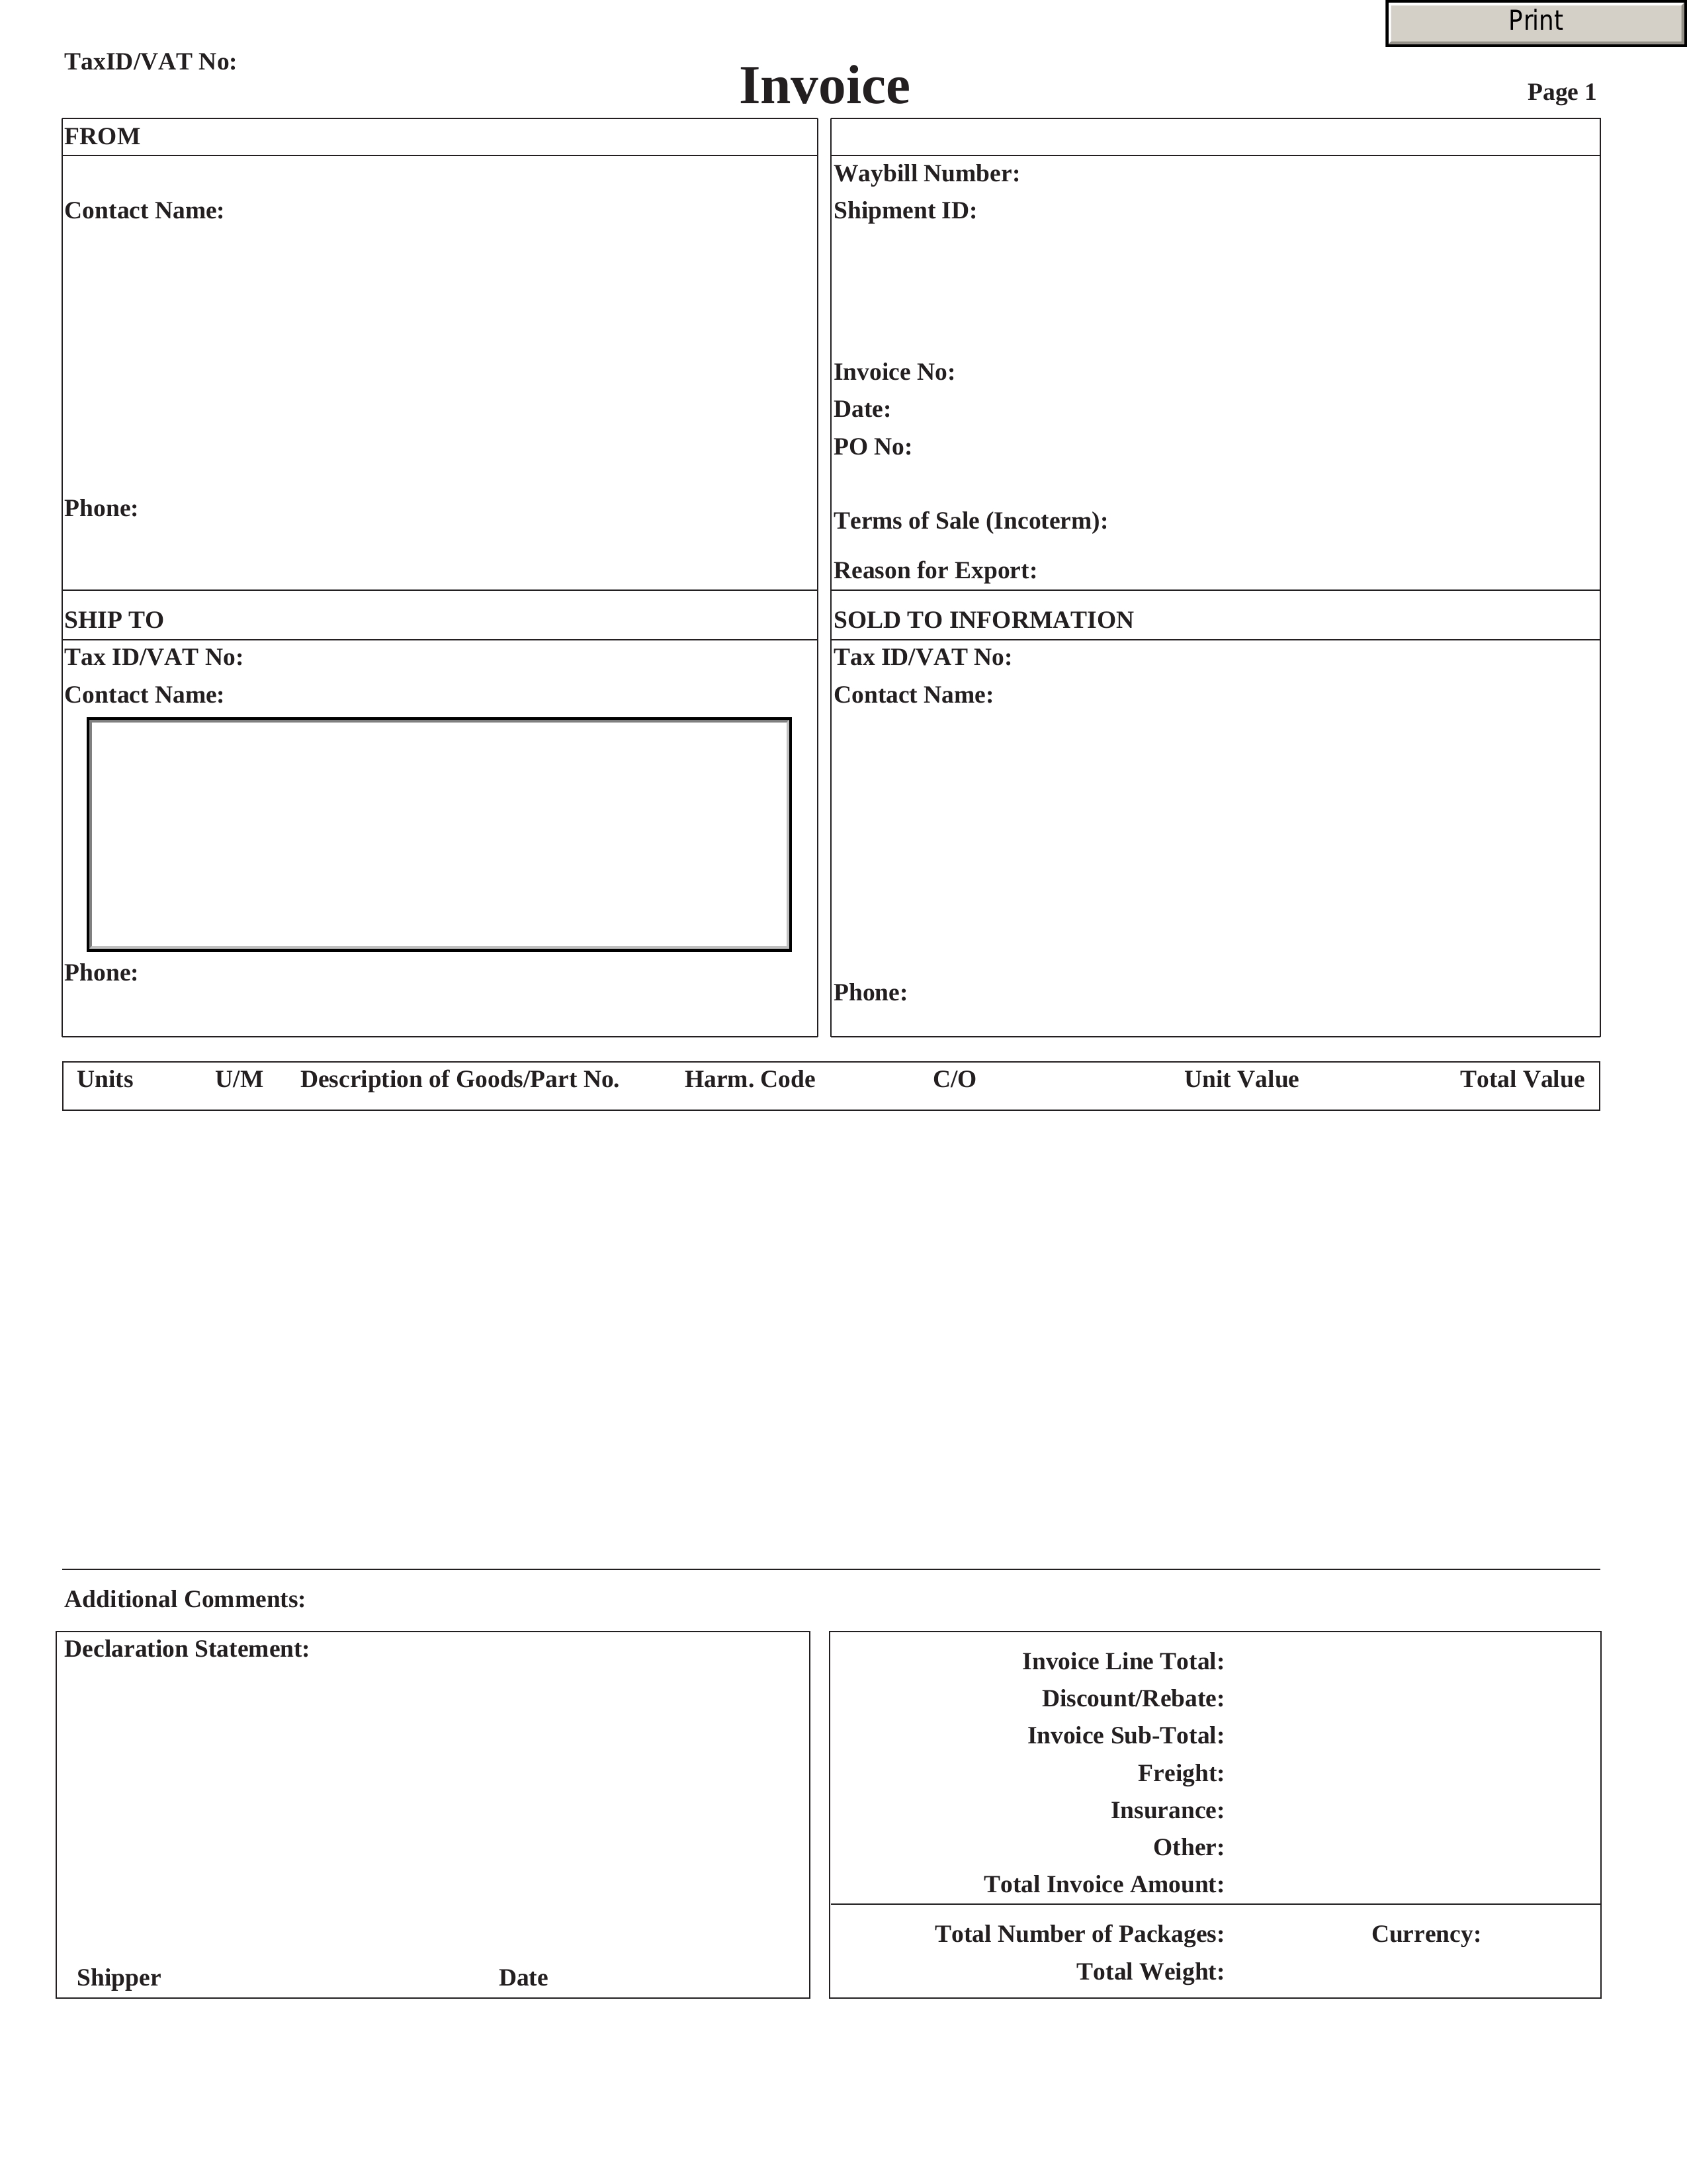 Ups International Commercial Invoice Template